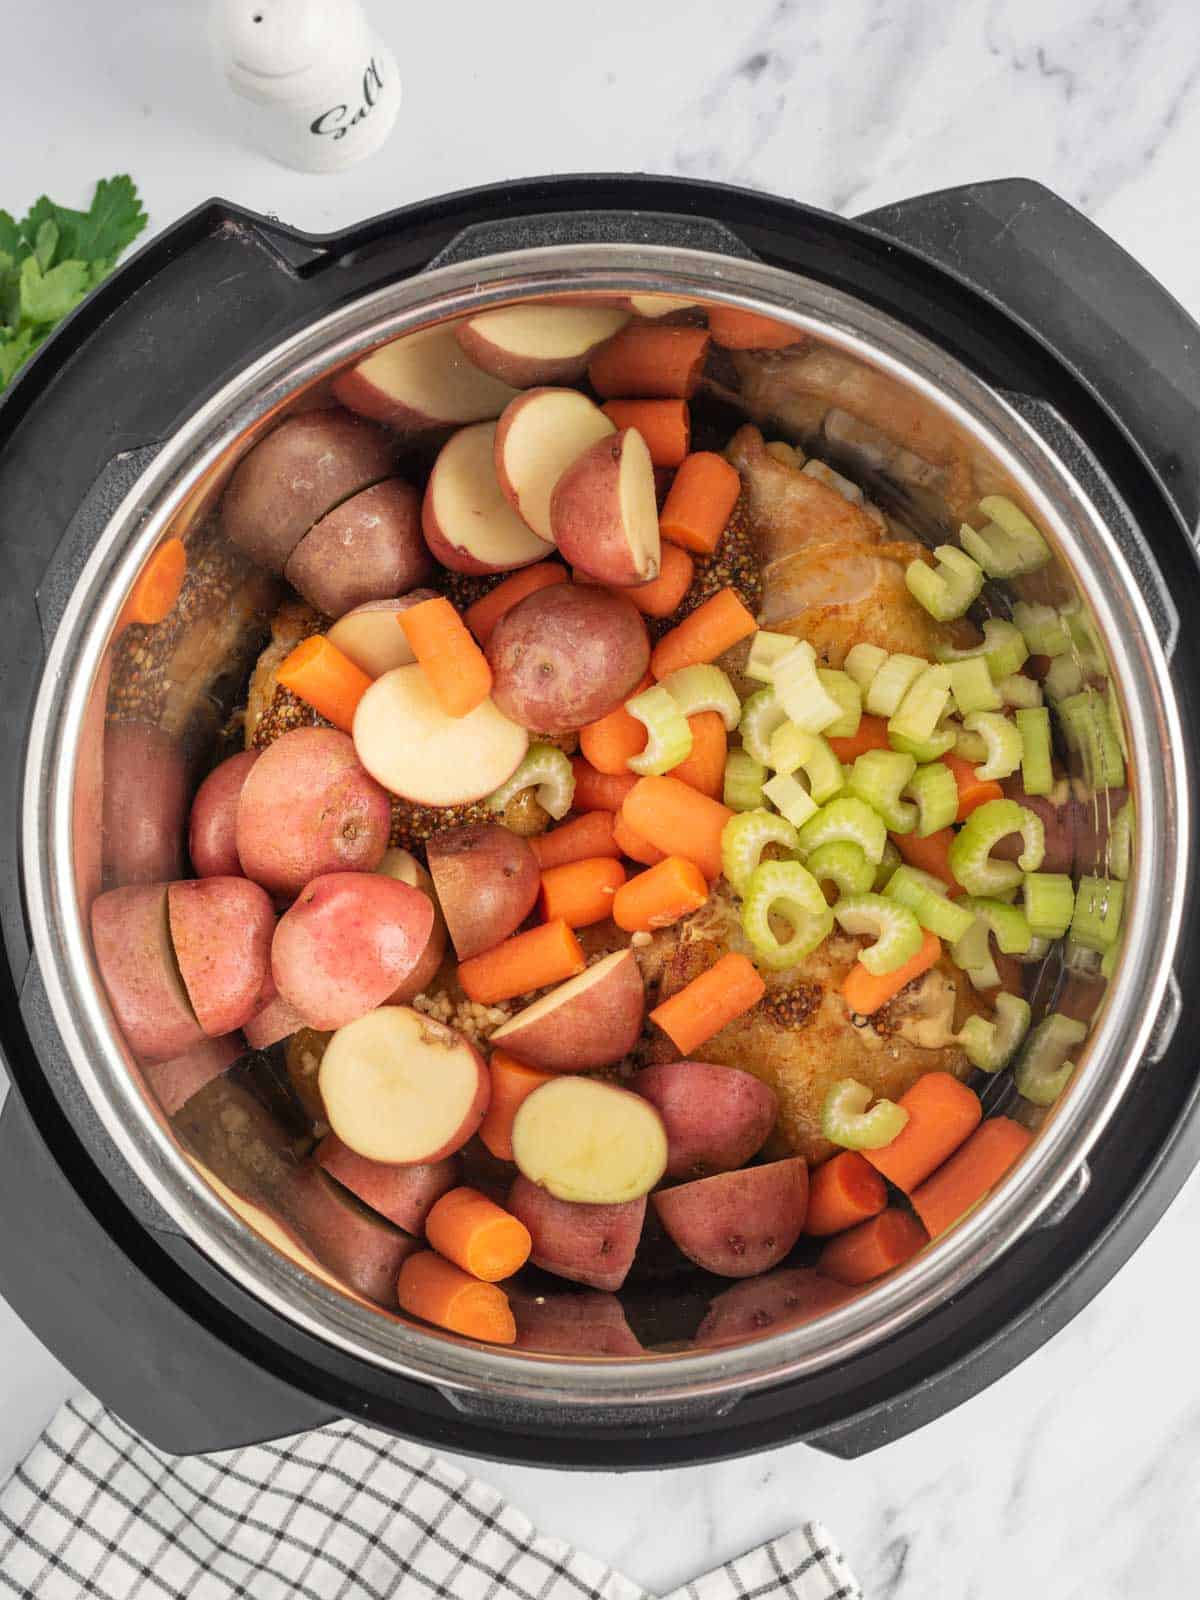 Add potatoes and carrots to the instant pot with chicken thighs.